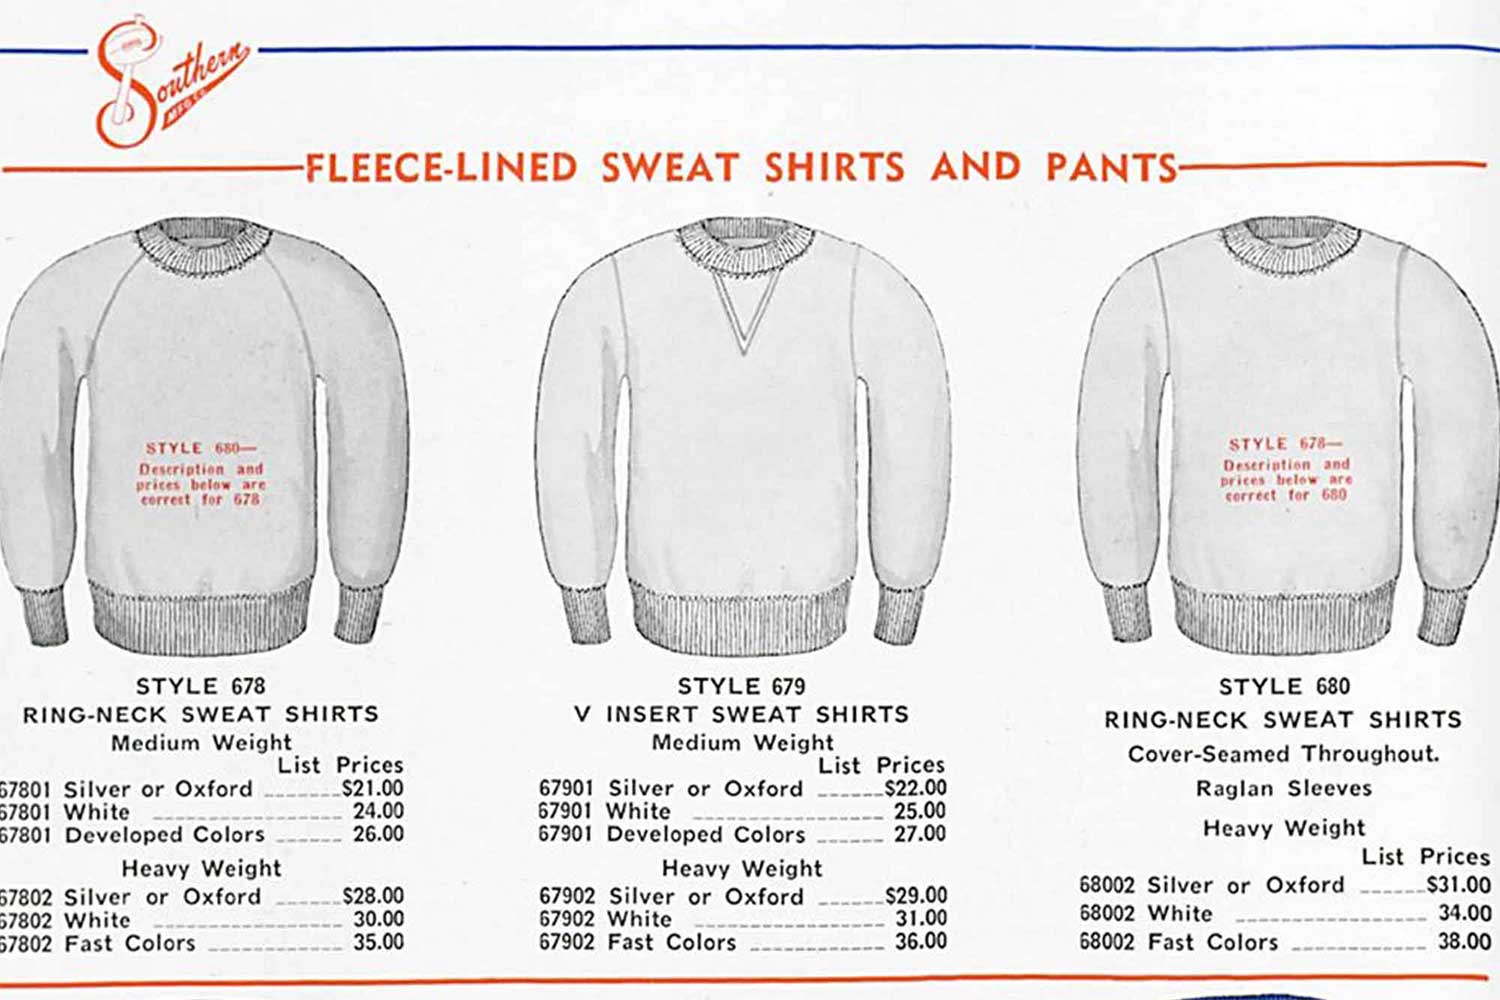 contar hasta Impedir Digital difference between sweater and jersey, Off 66%, www.iusarecords.com